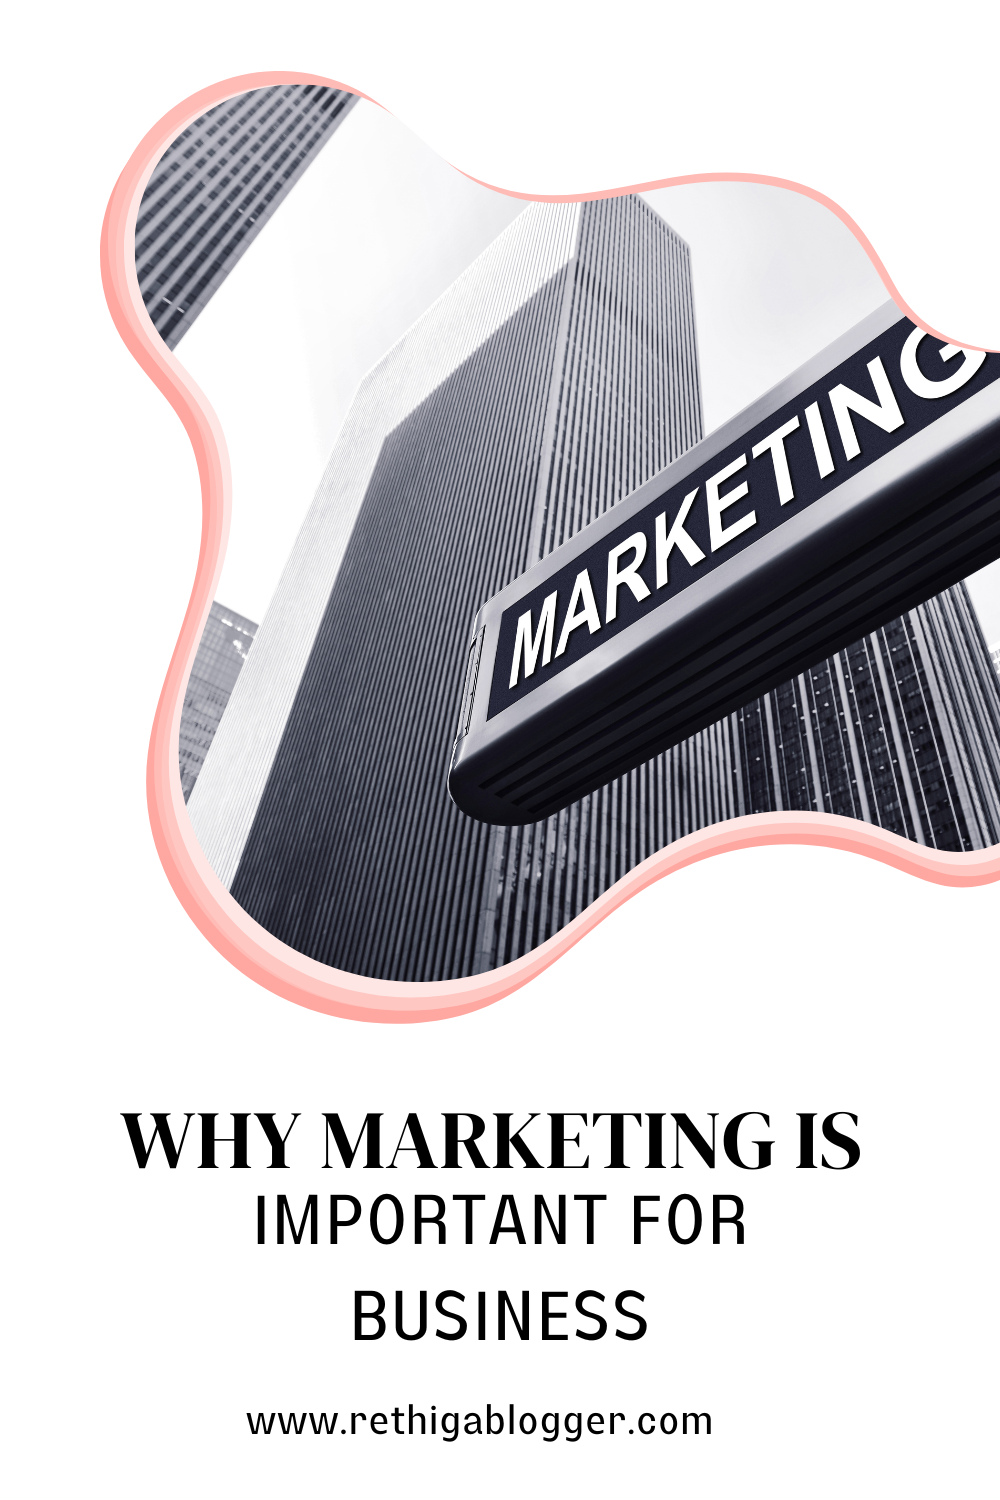 Why marketing is important for business